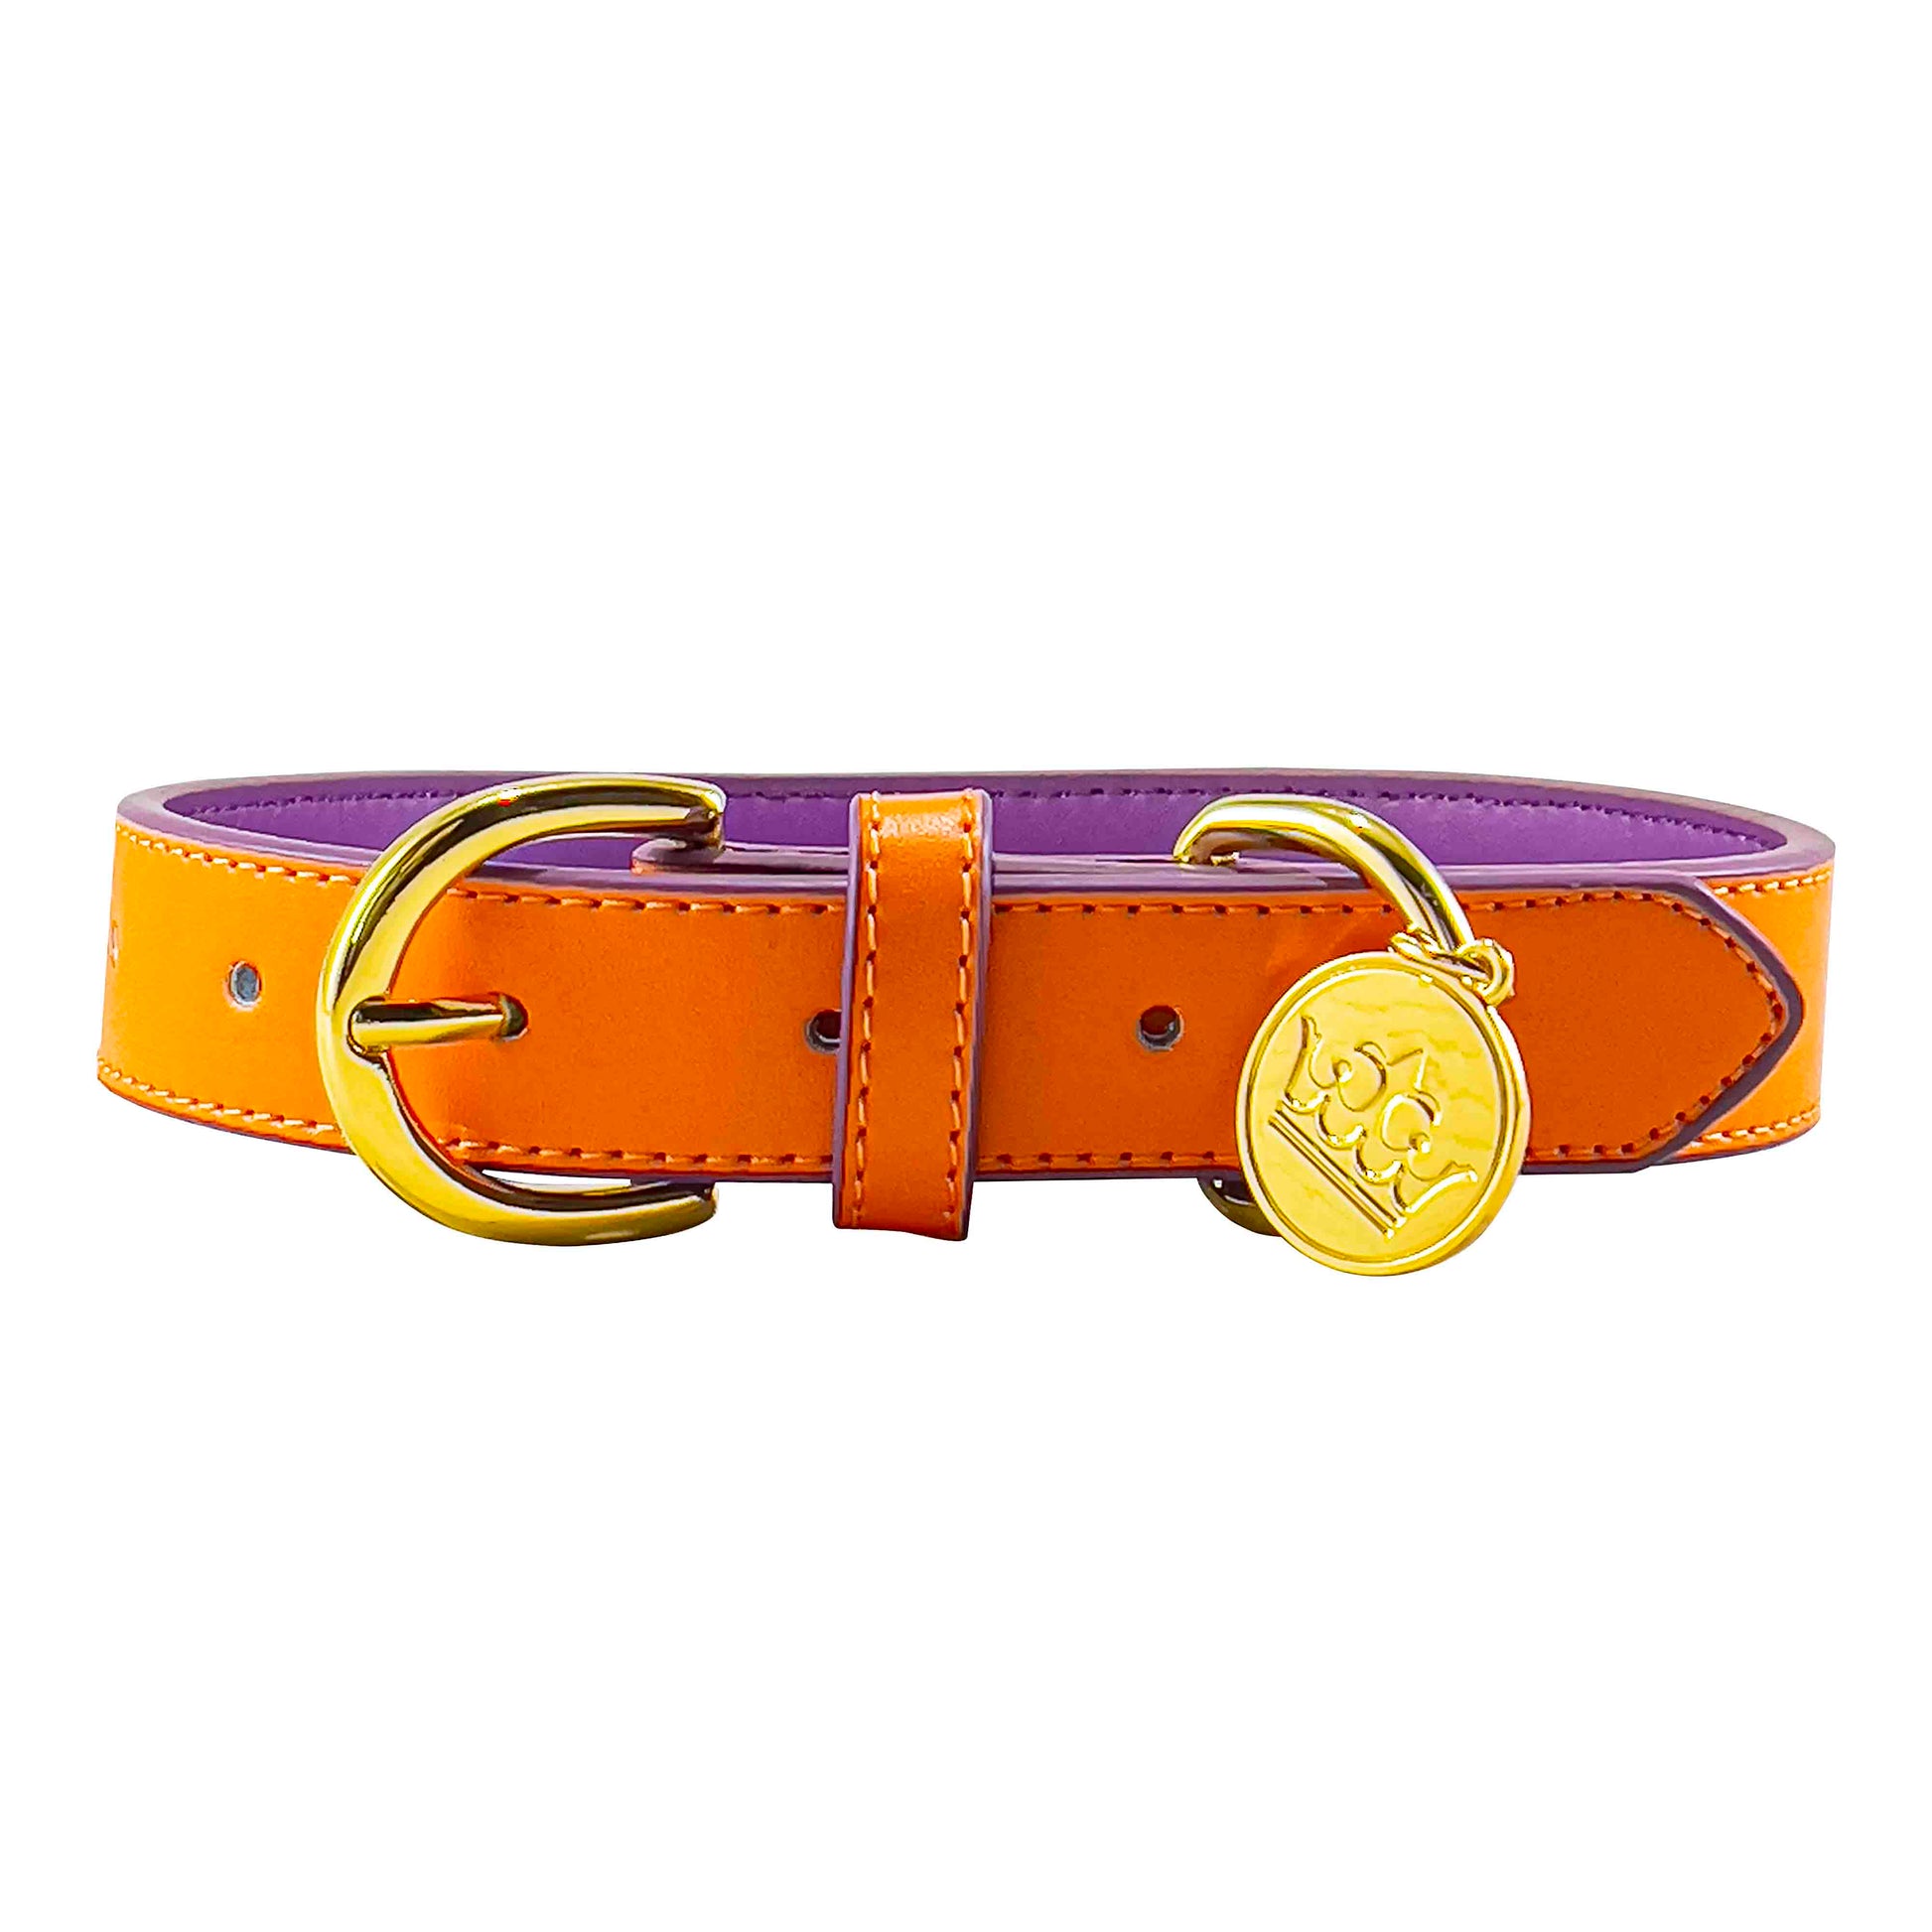 Bek & Co Regal Orange Leather French Bulldog collar on white background showing crown charm